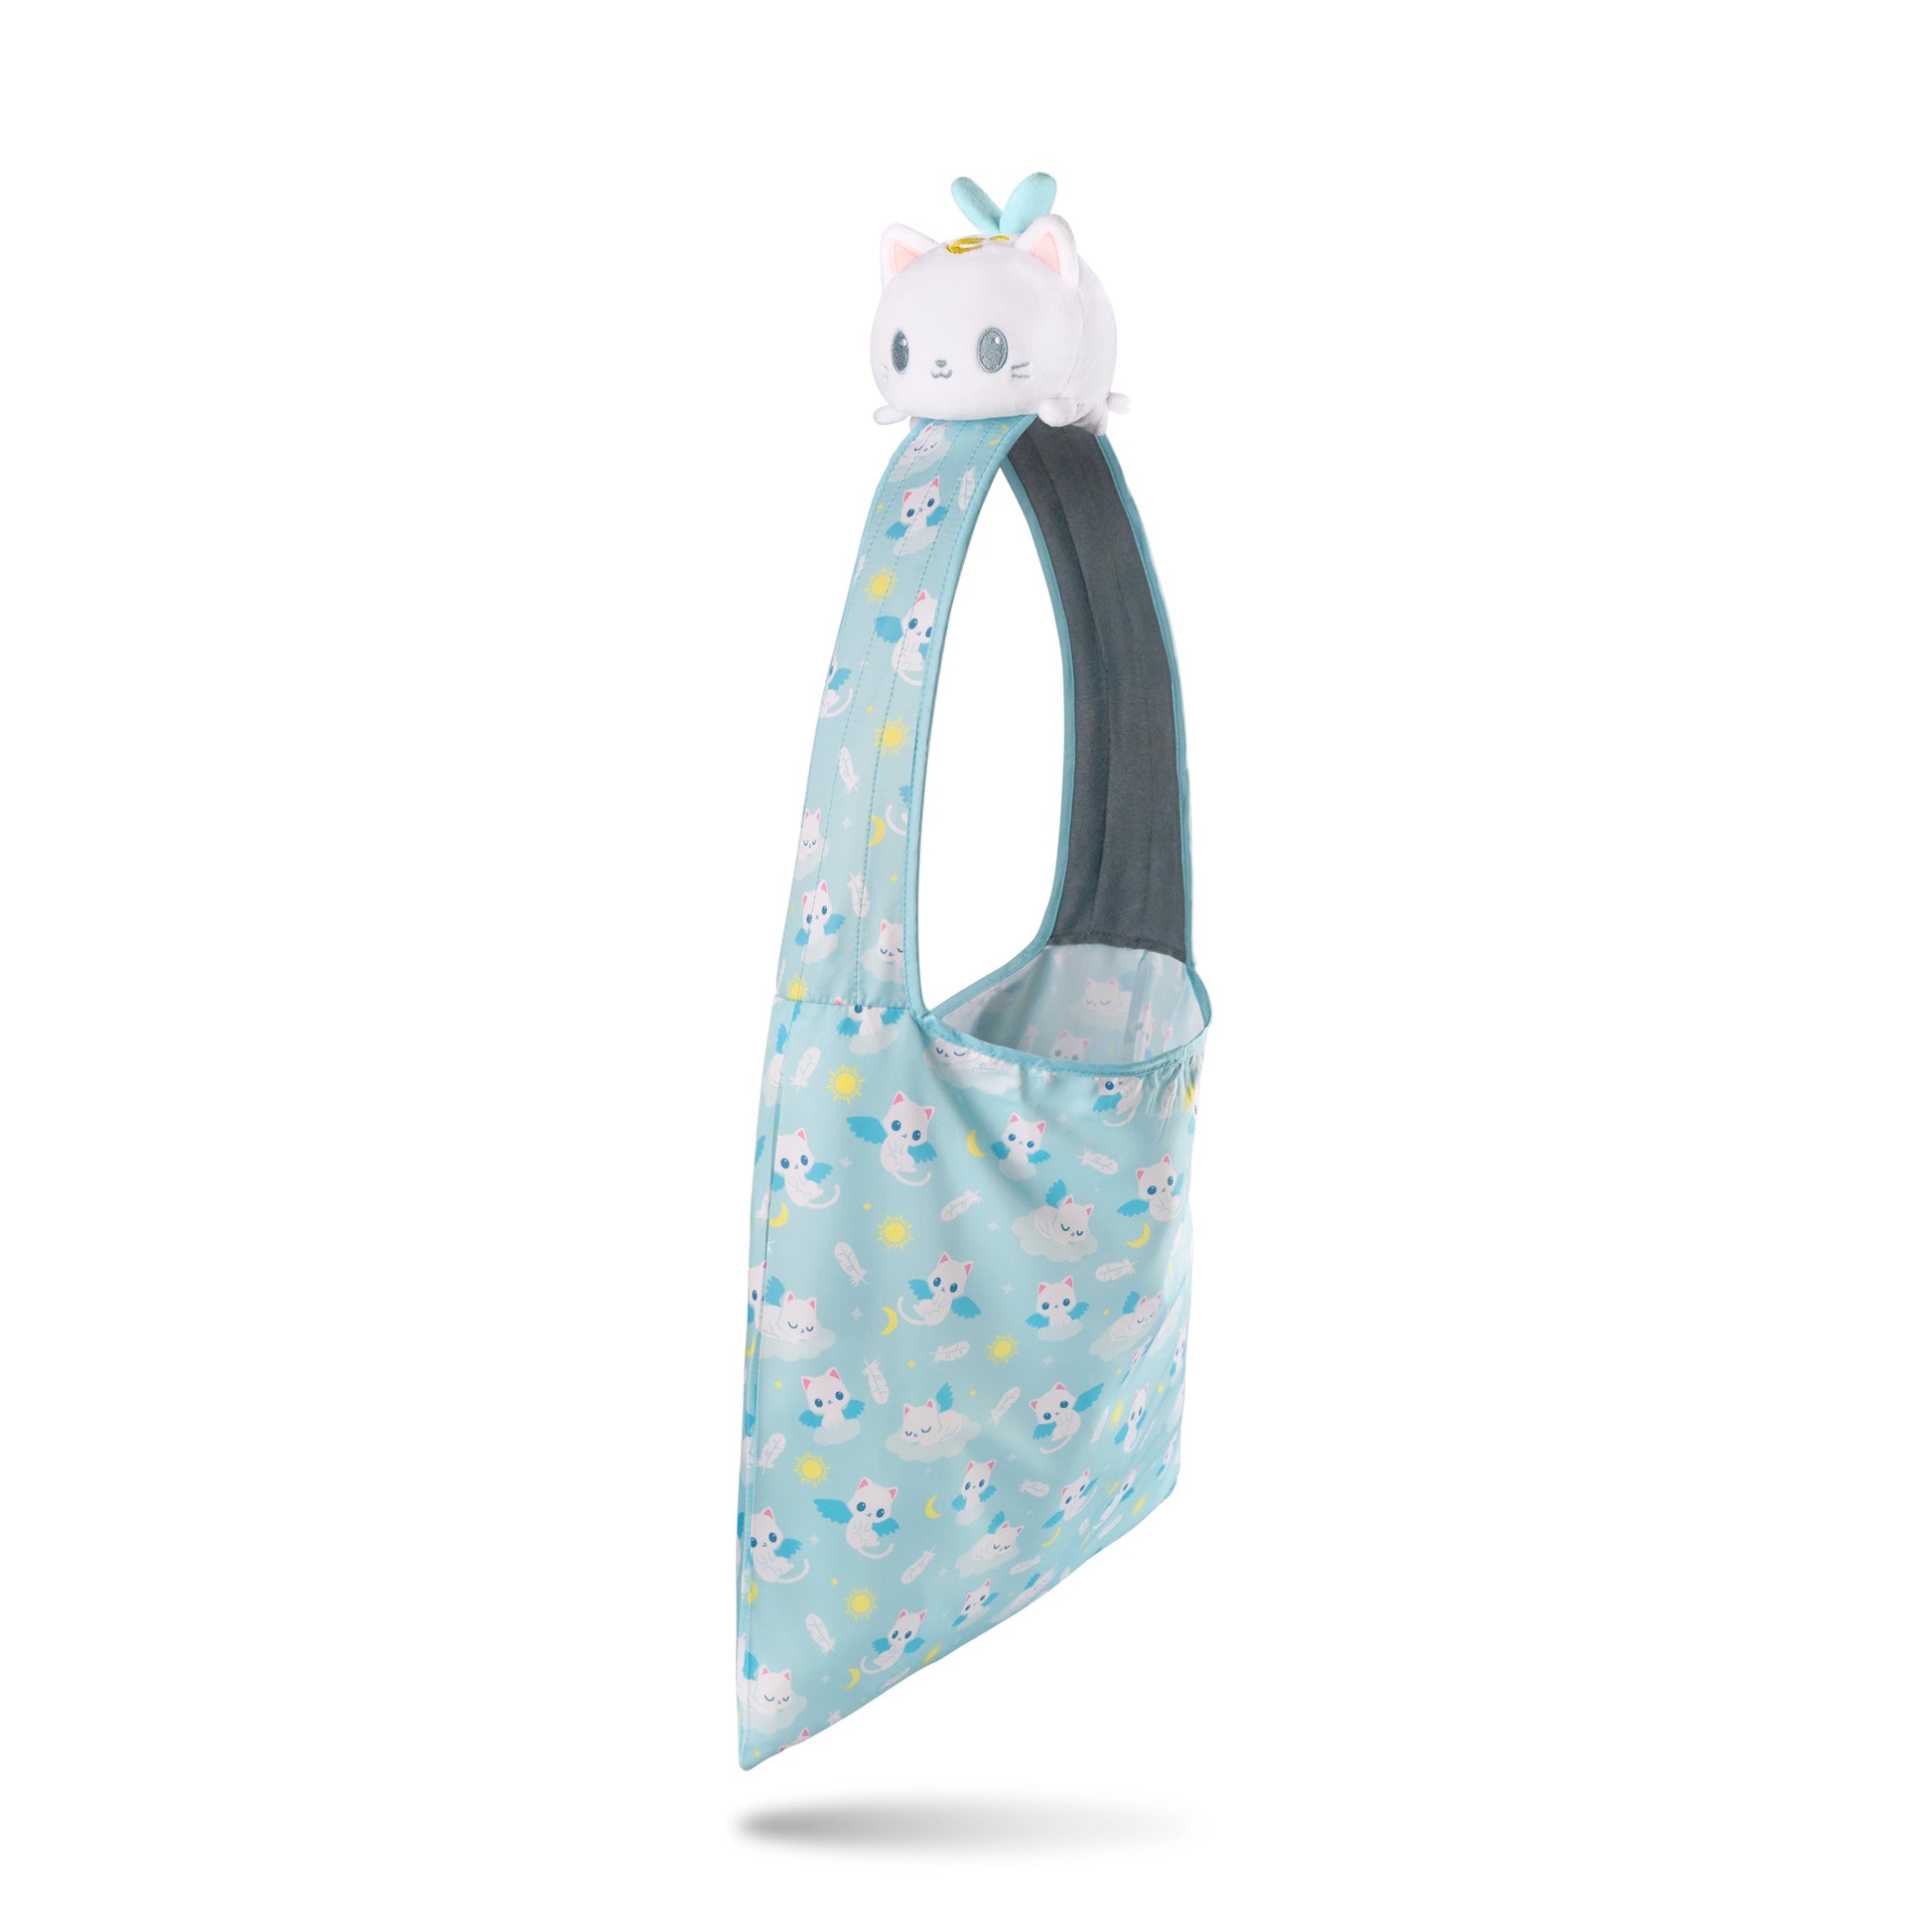 A blue and white Plushiverse Angelic Kitty Plushie Tote Bag with a unicorn on it, featuring a velcro storage pouch by TeeTurtle.